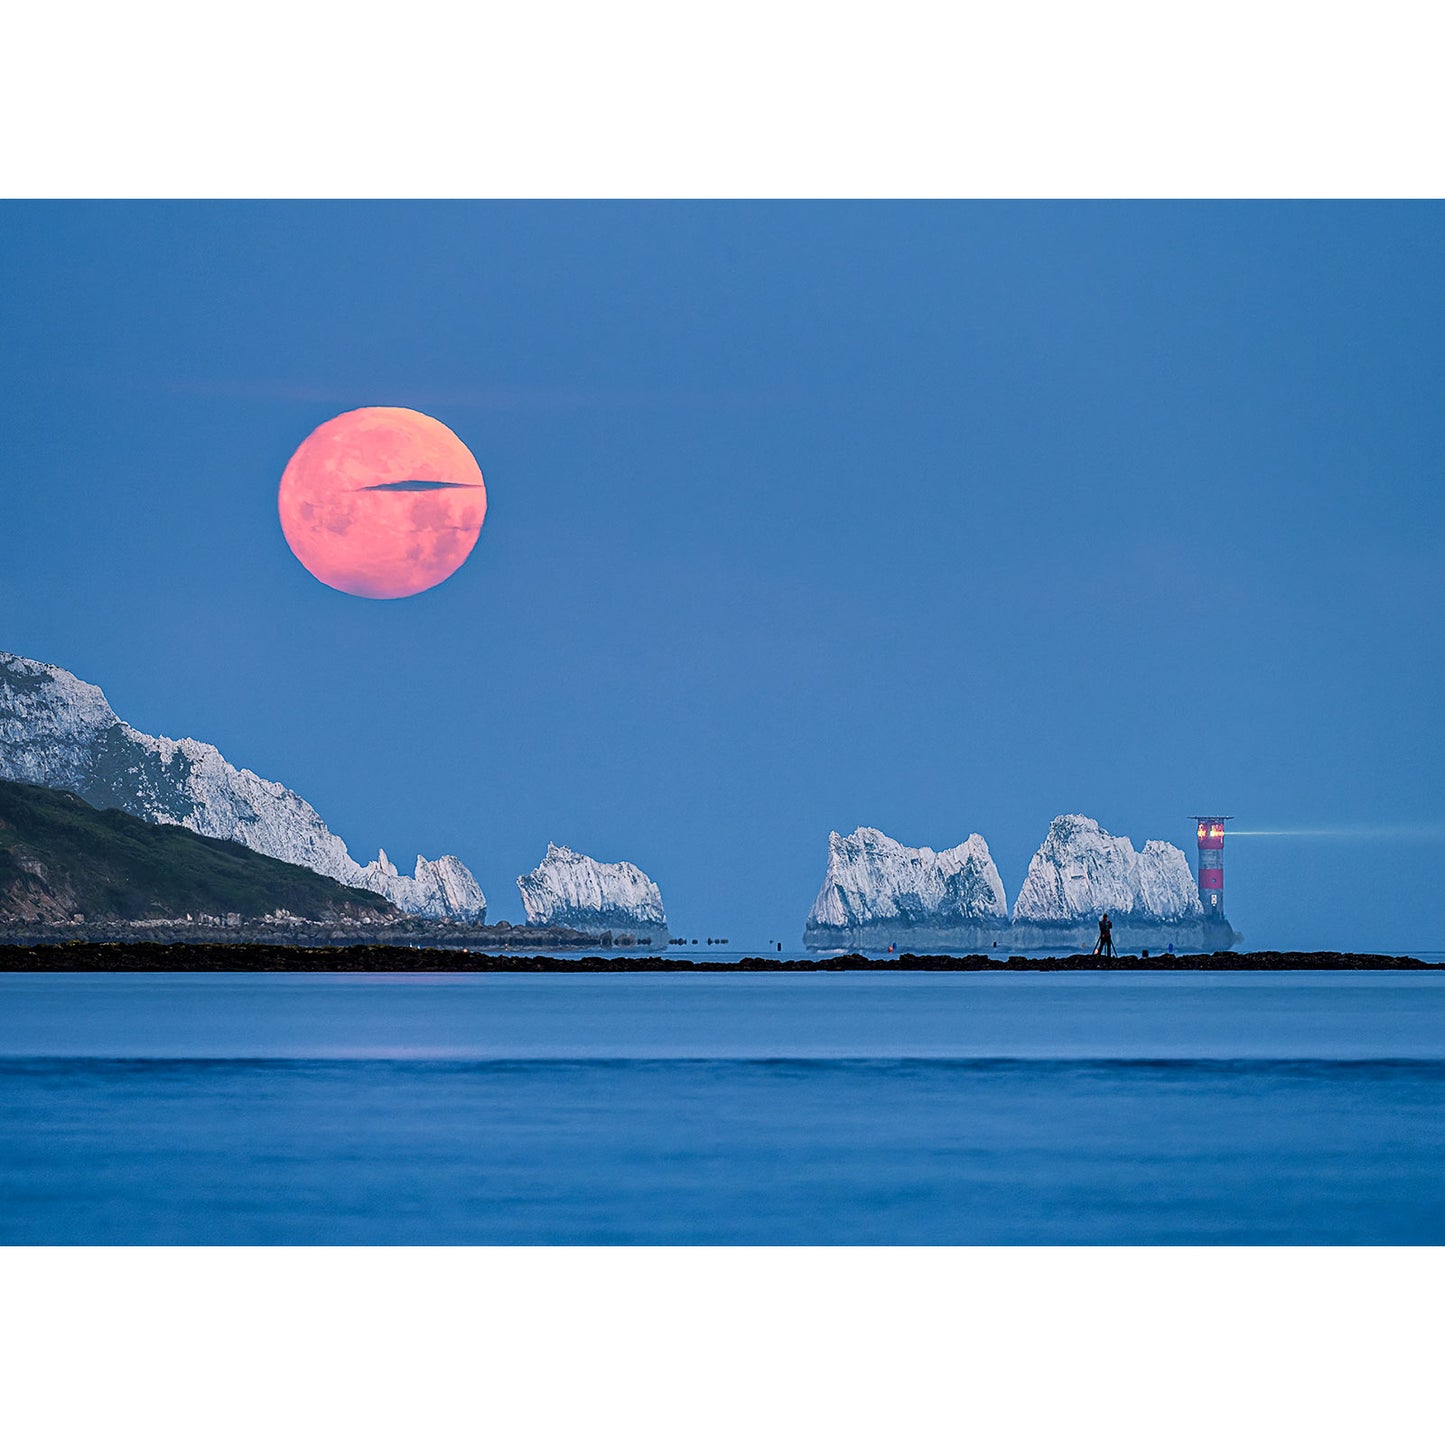 Moonset over The Needles